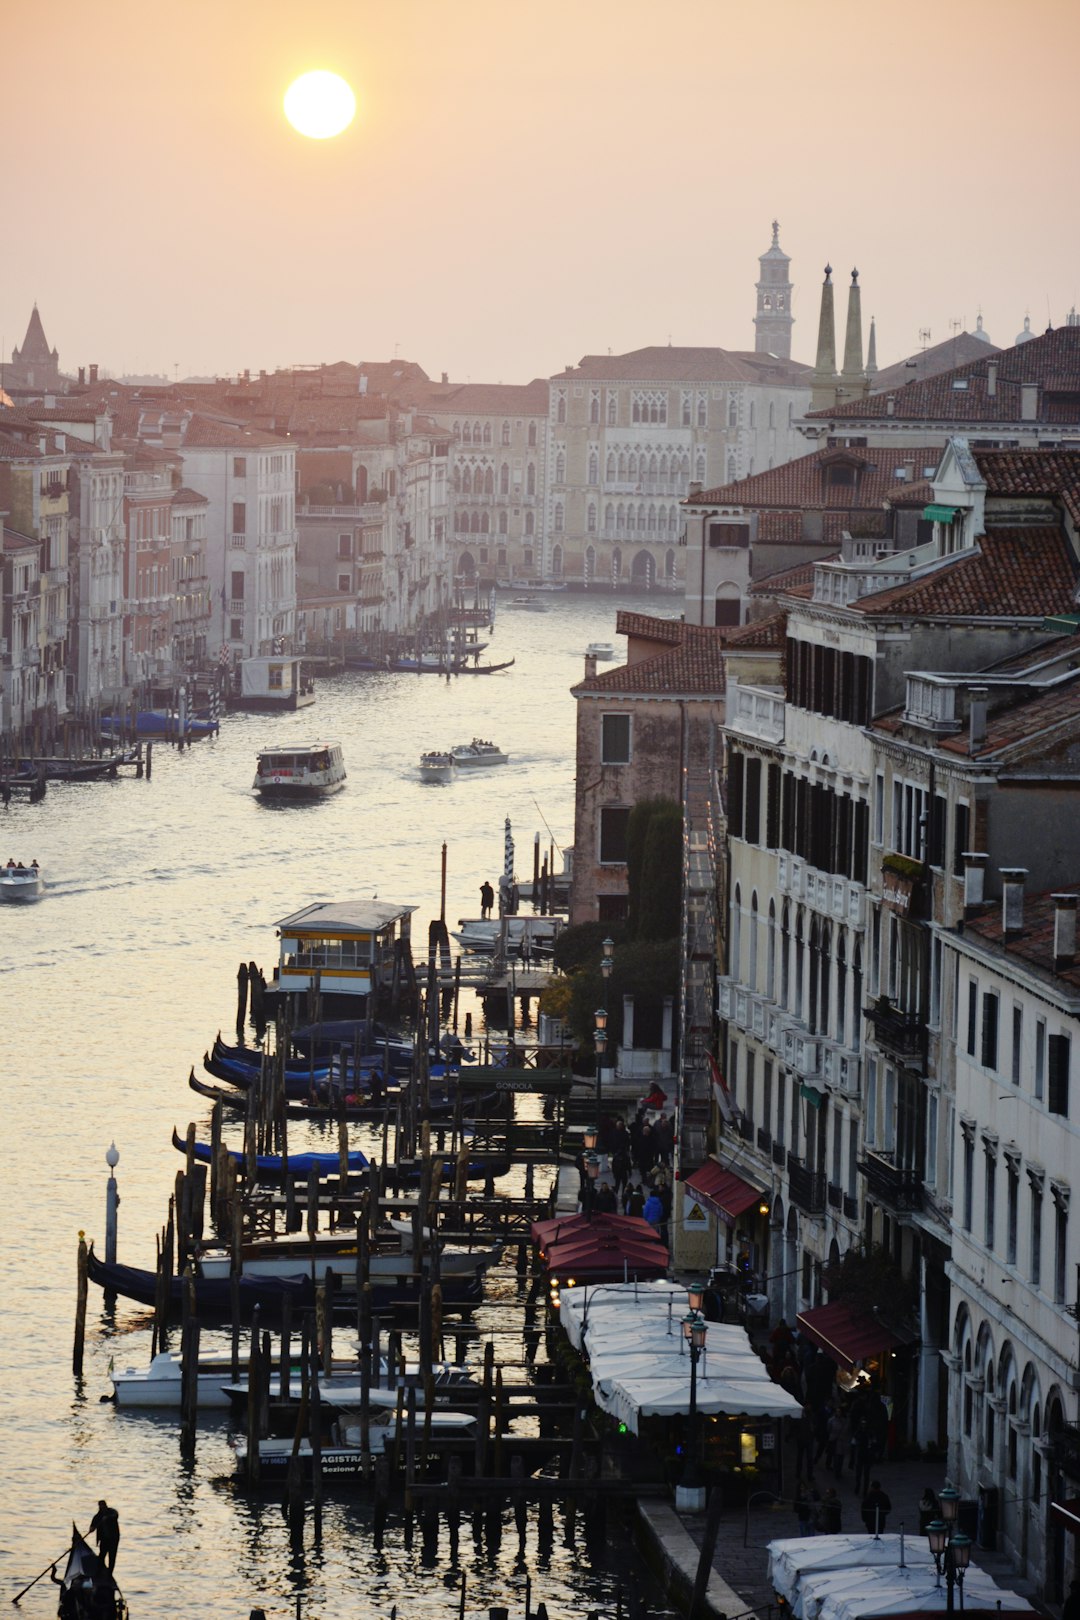 travelers stories about Town in Venise, Italy